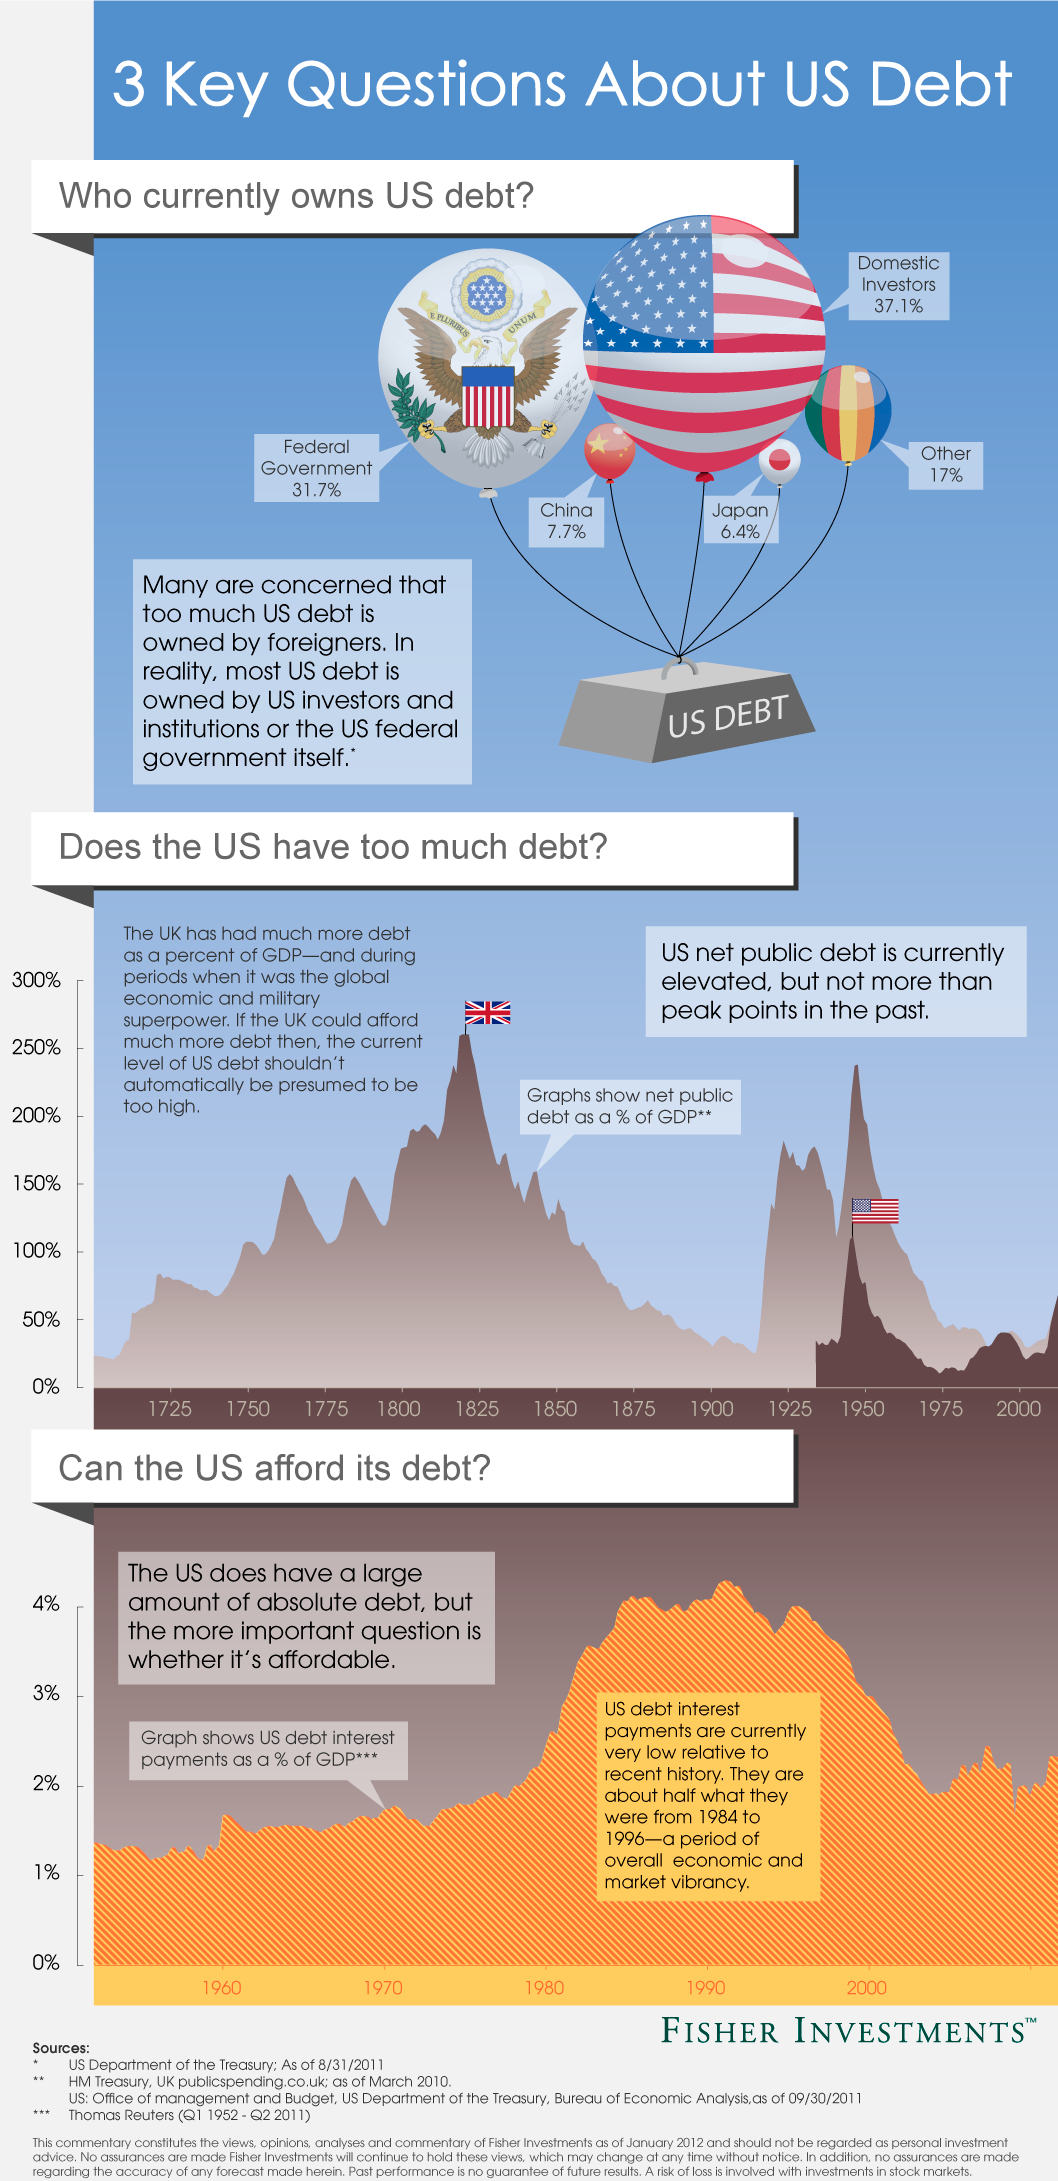 3 Key Questions About U.S. Debt